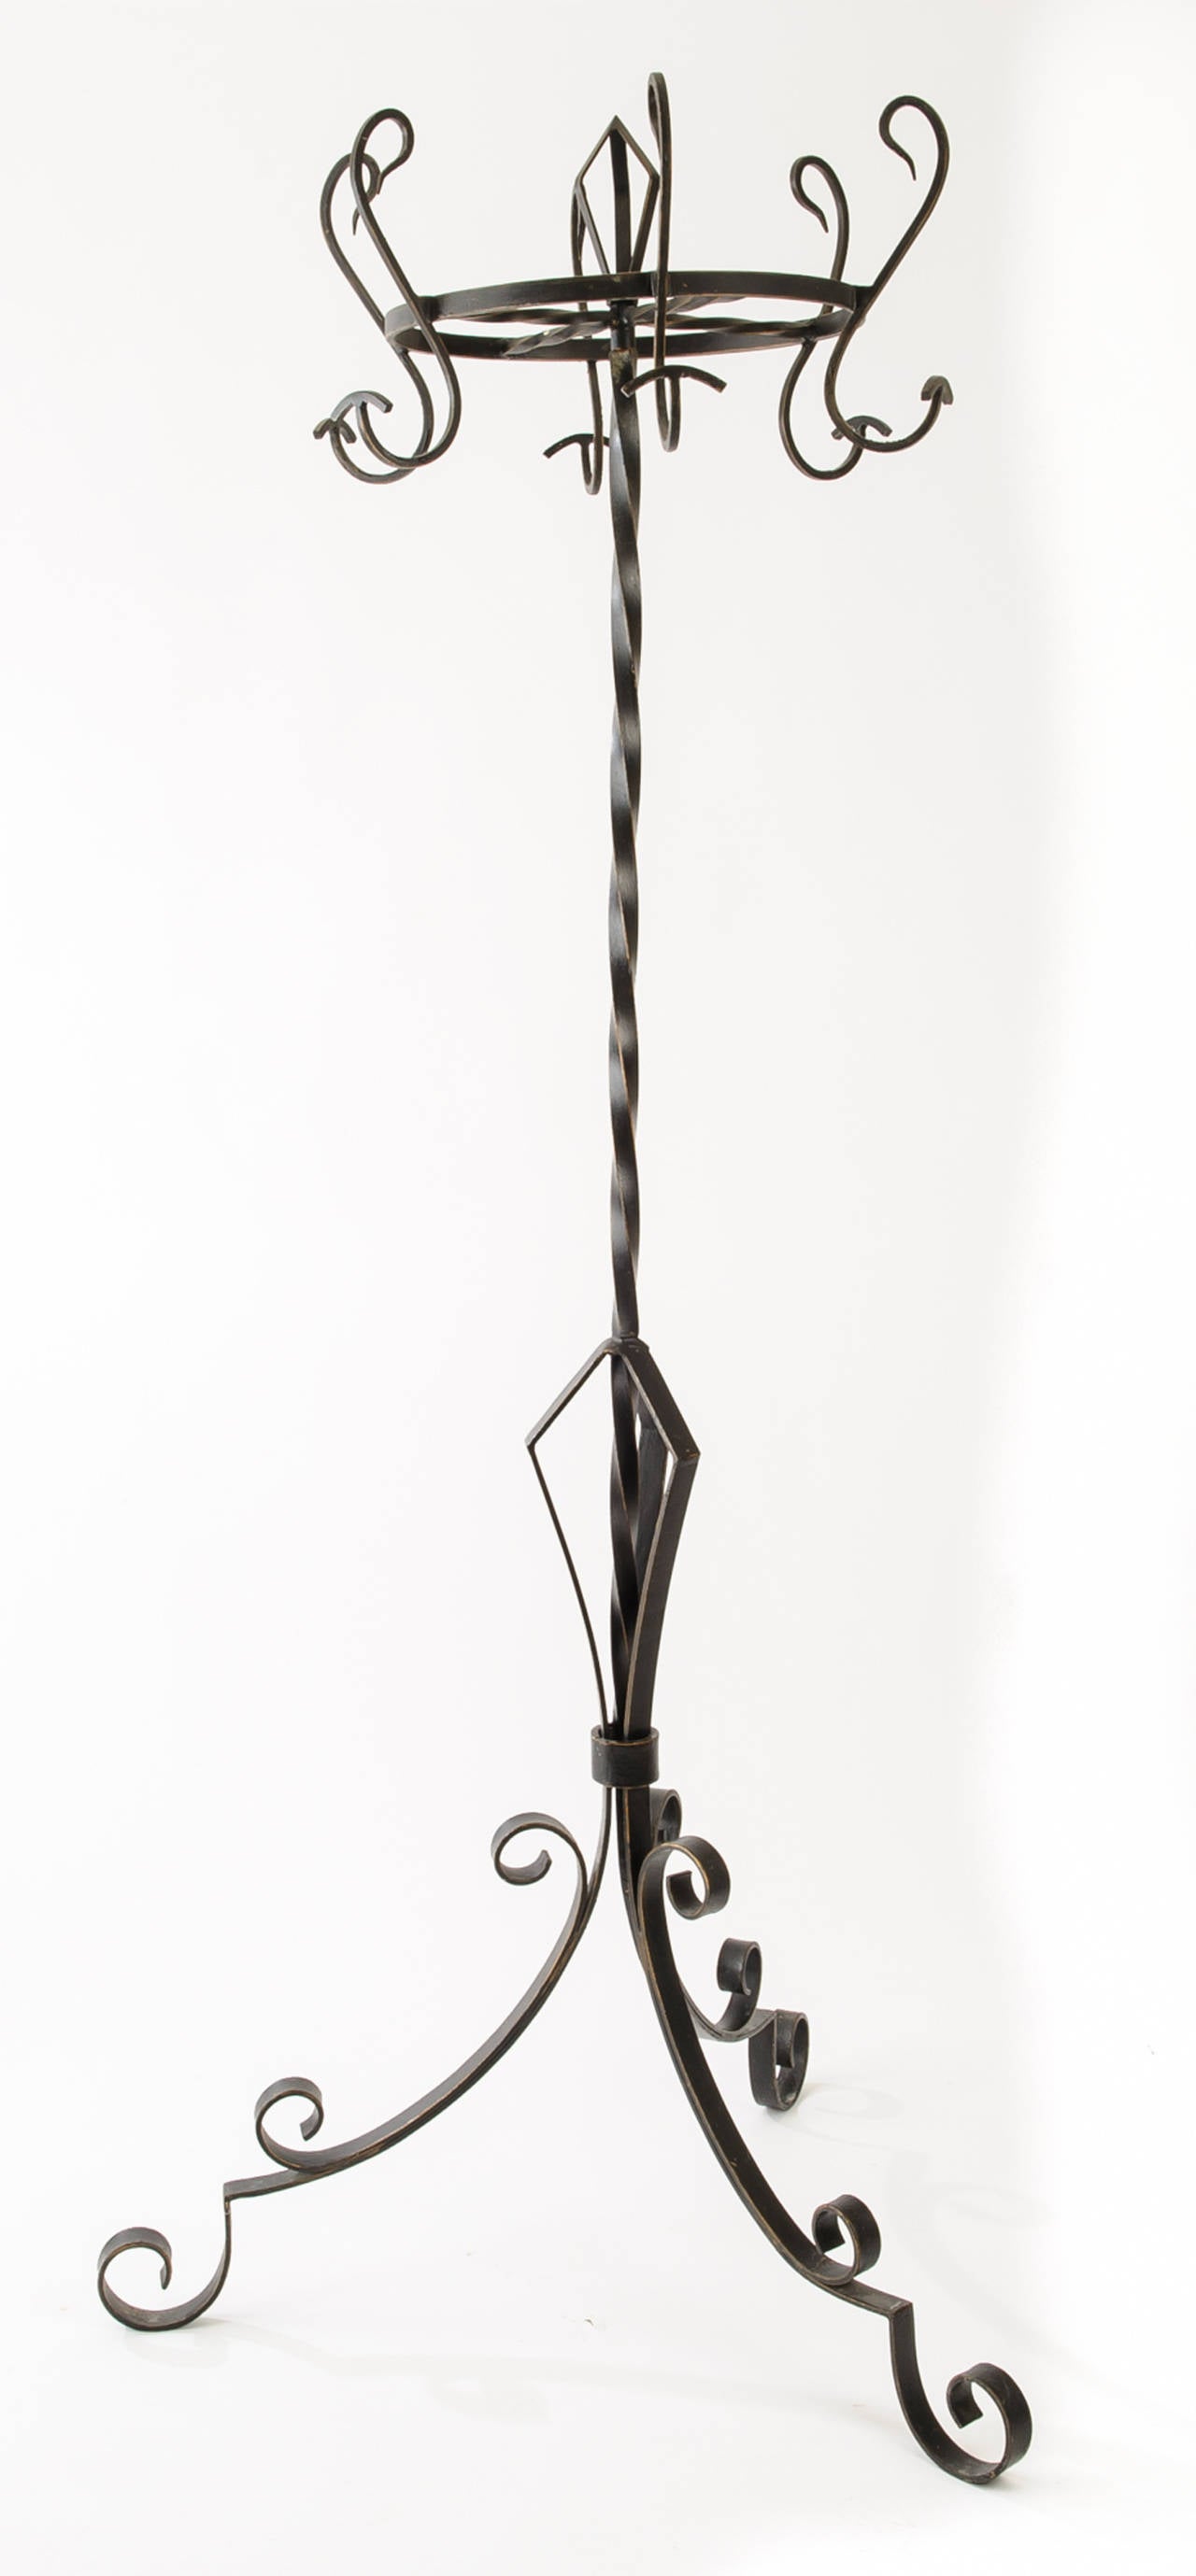 Large early Art Deco iron hat and coat rack that is likely from a French Brasserie.
Holds six hats and coats.